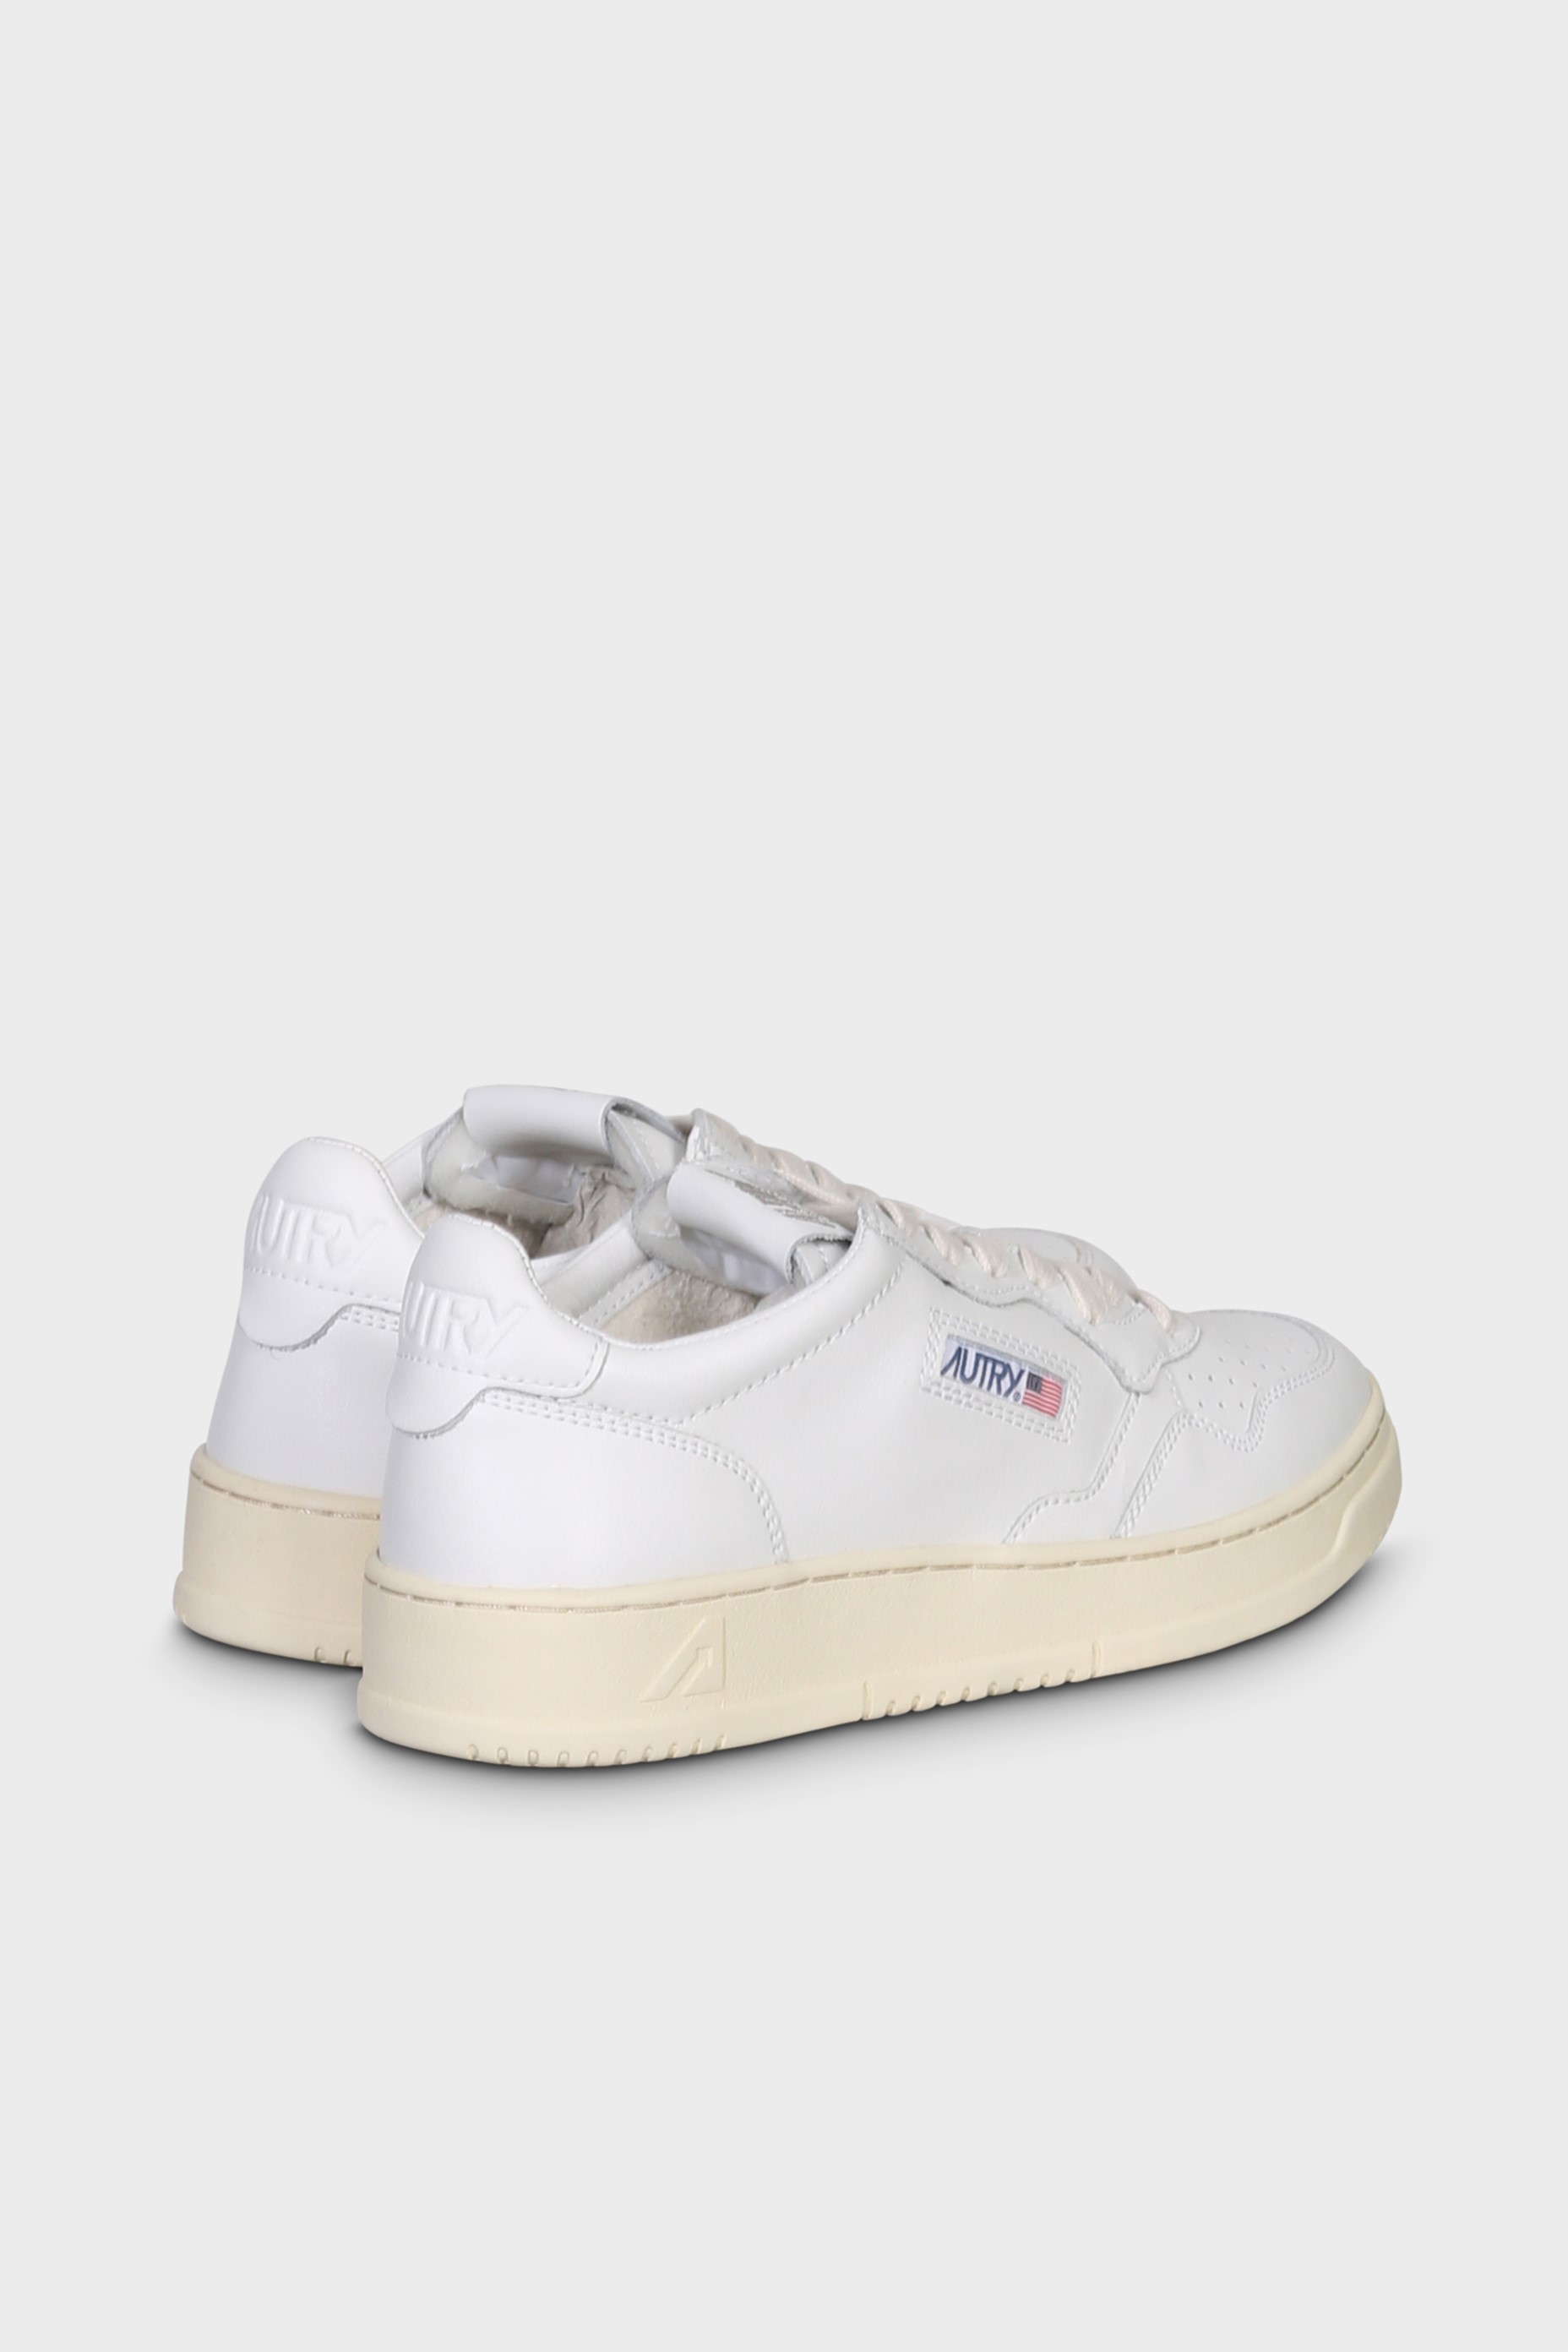 AUTRY ACTION SHOES Sneaker Low in White/White 35